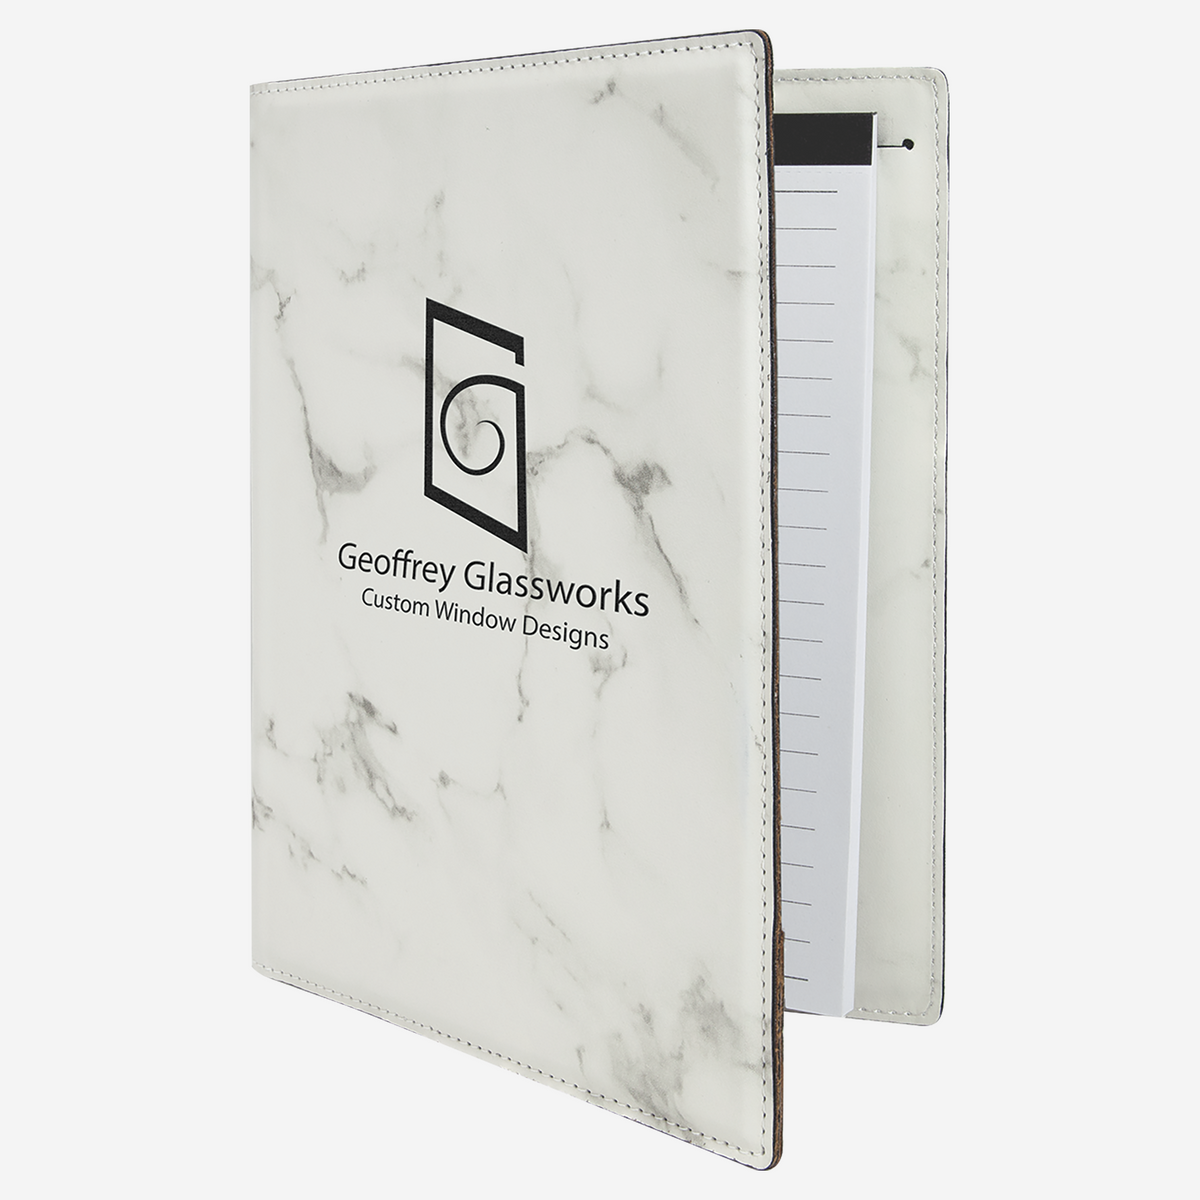 7" x 9" Laserable White Marble Leatherette Small Portfolio with Notepad partial open view with black Geoffrey Glassworks logo with partial notepad view